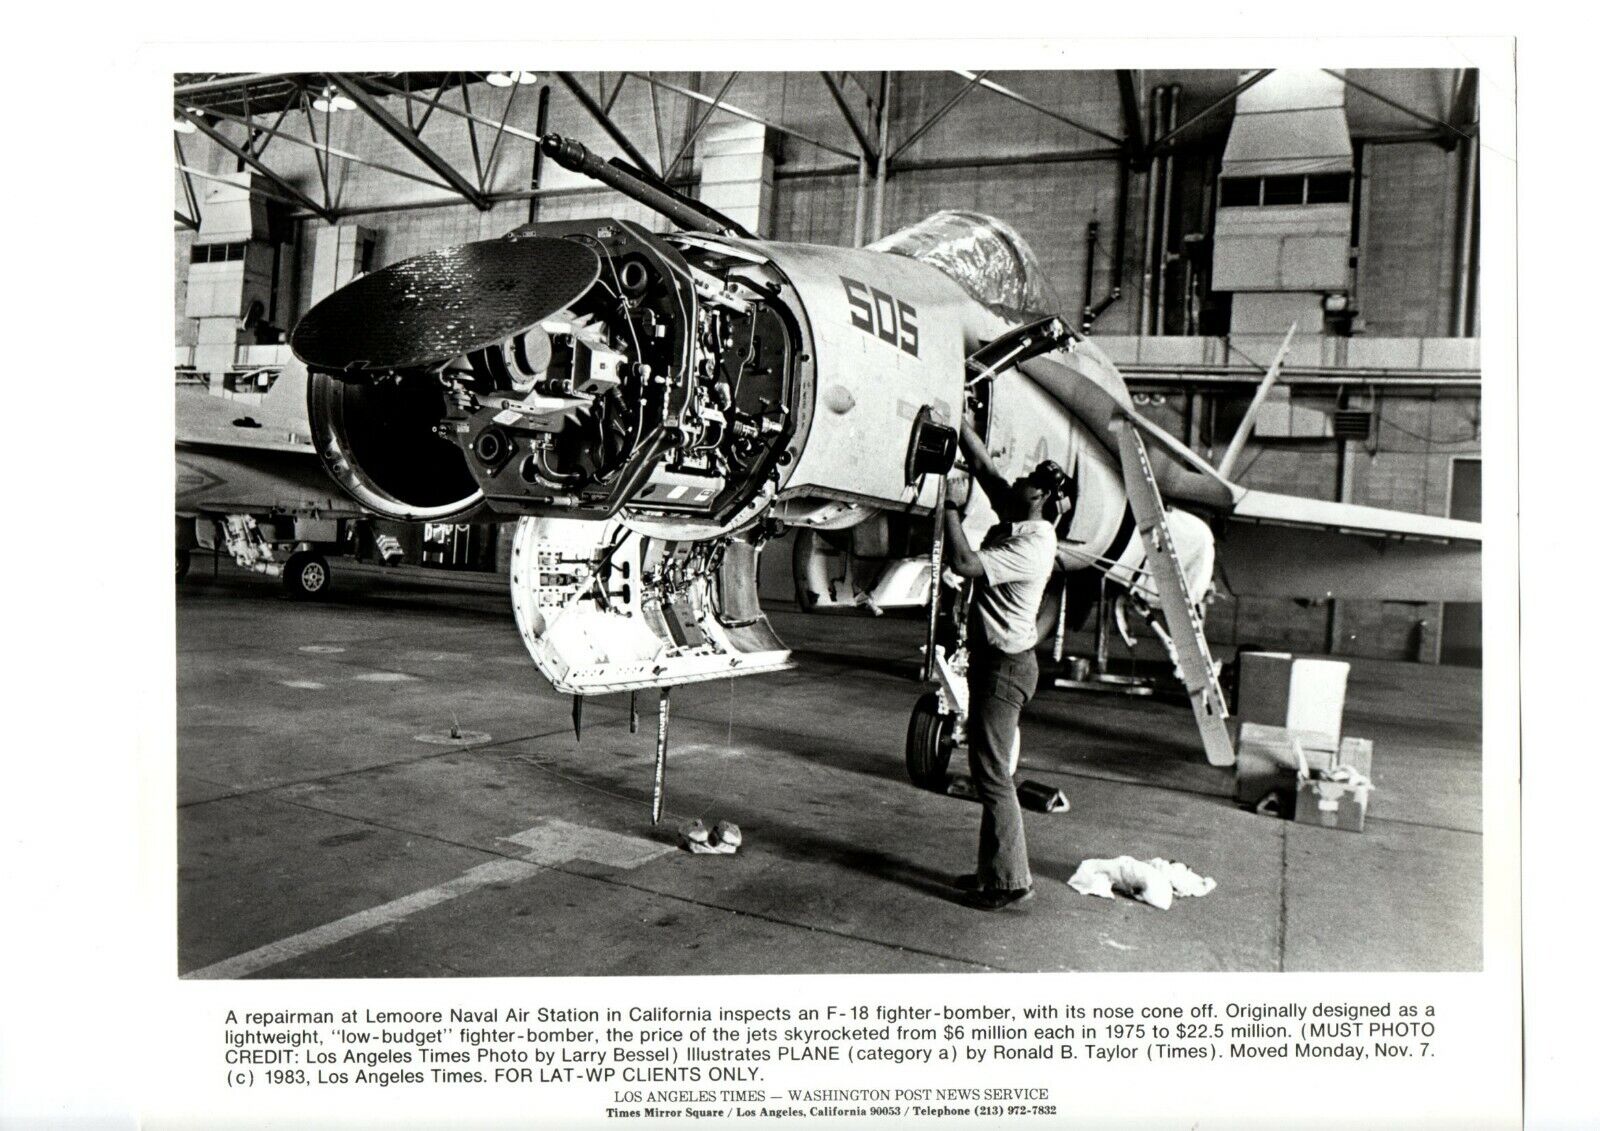 LEMOORE NAVAL AIR STATION F-18 FIGHTER BEING REPAIRED 1983 VTG Press Photo Y37